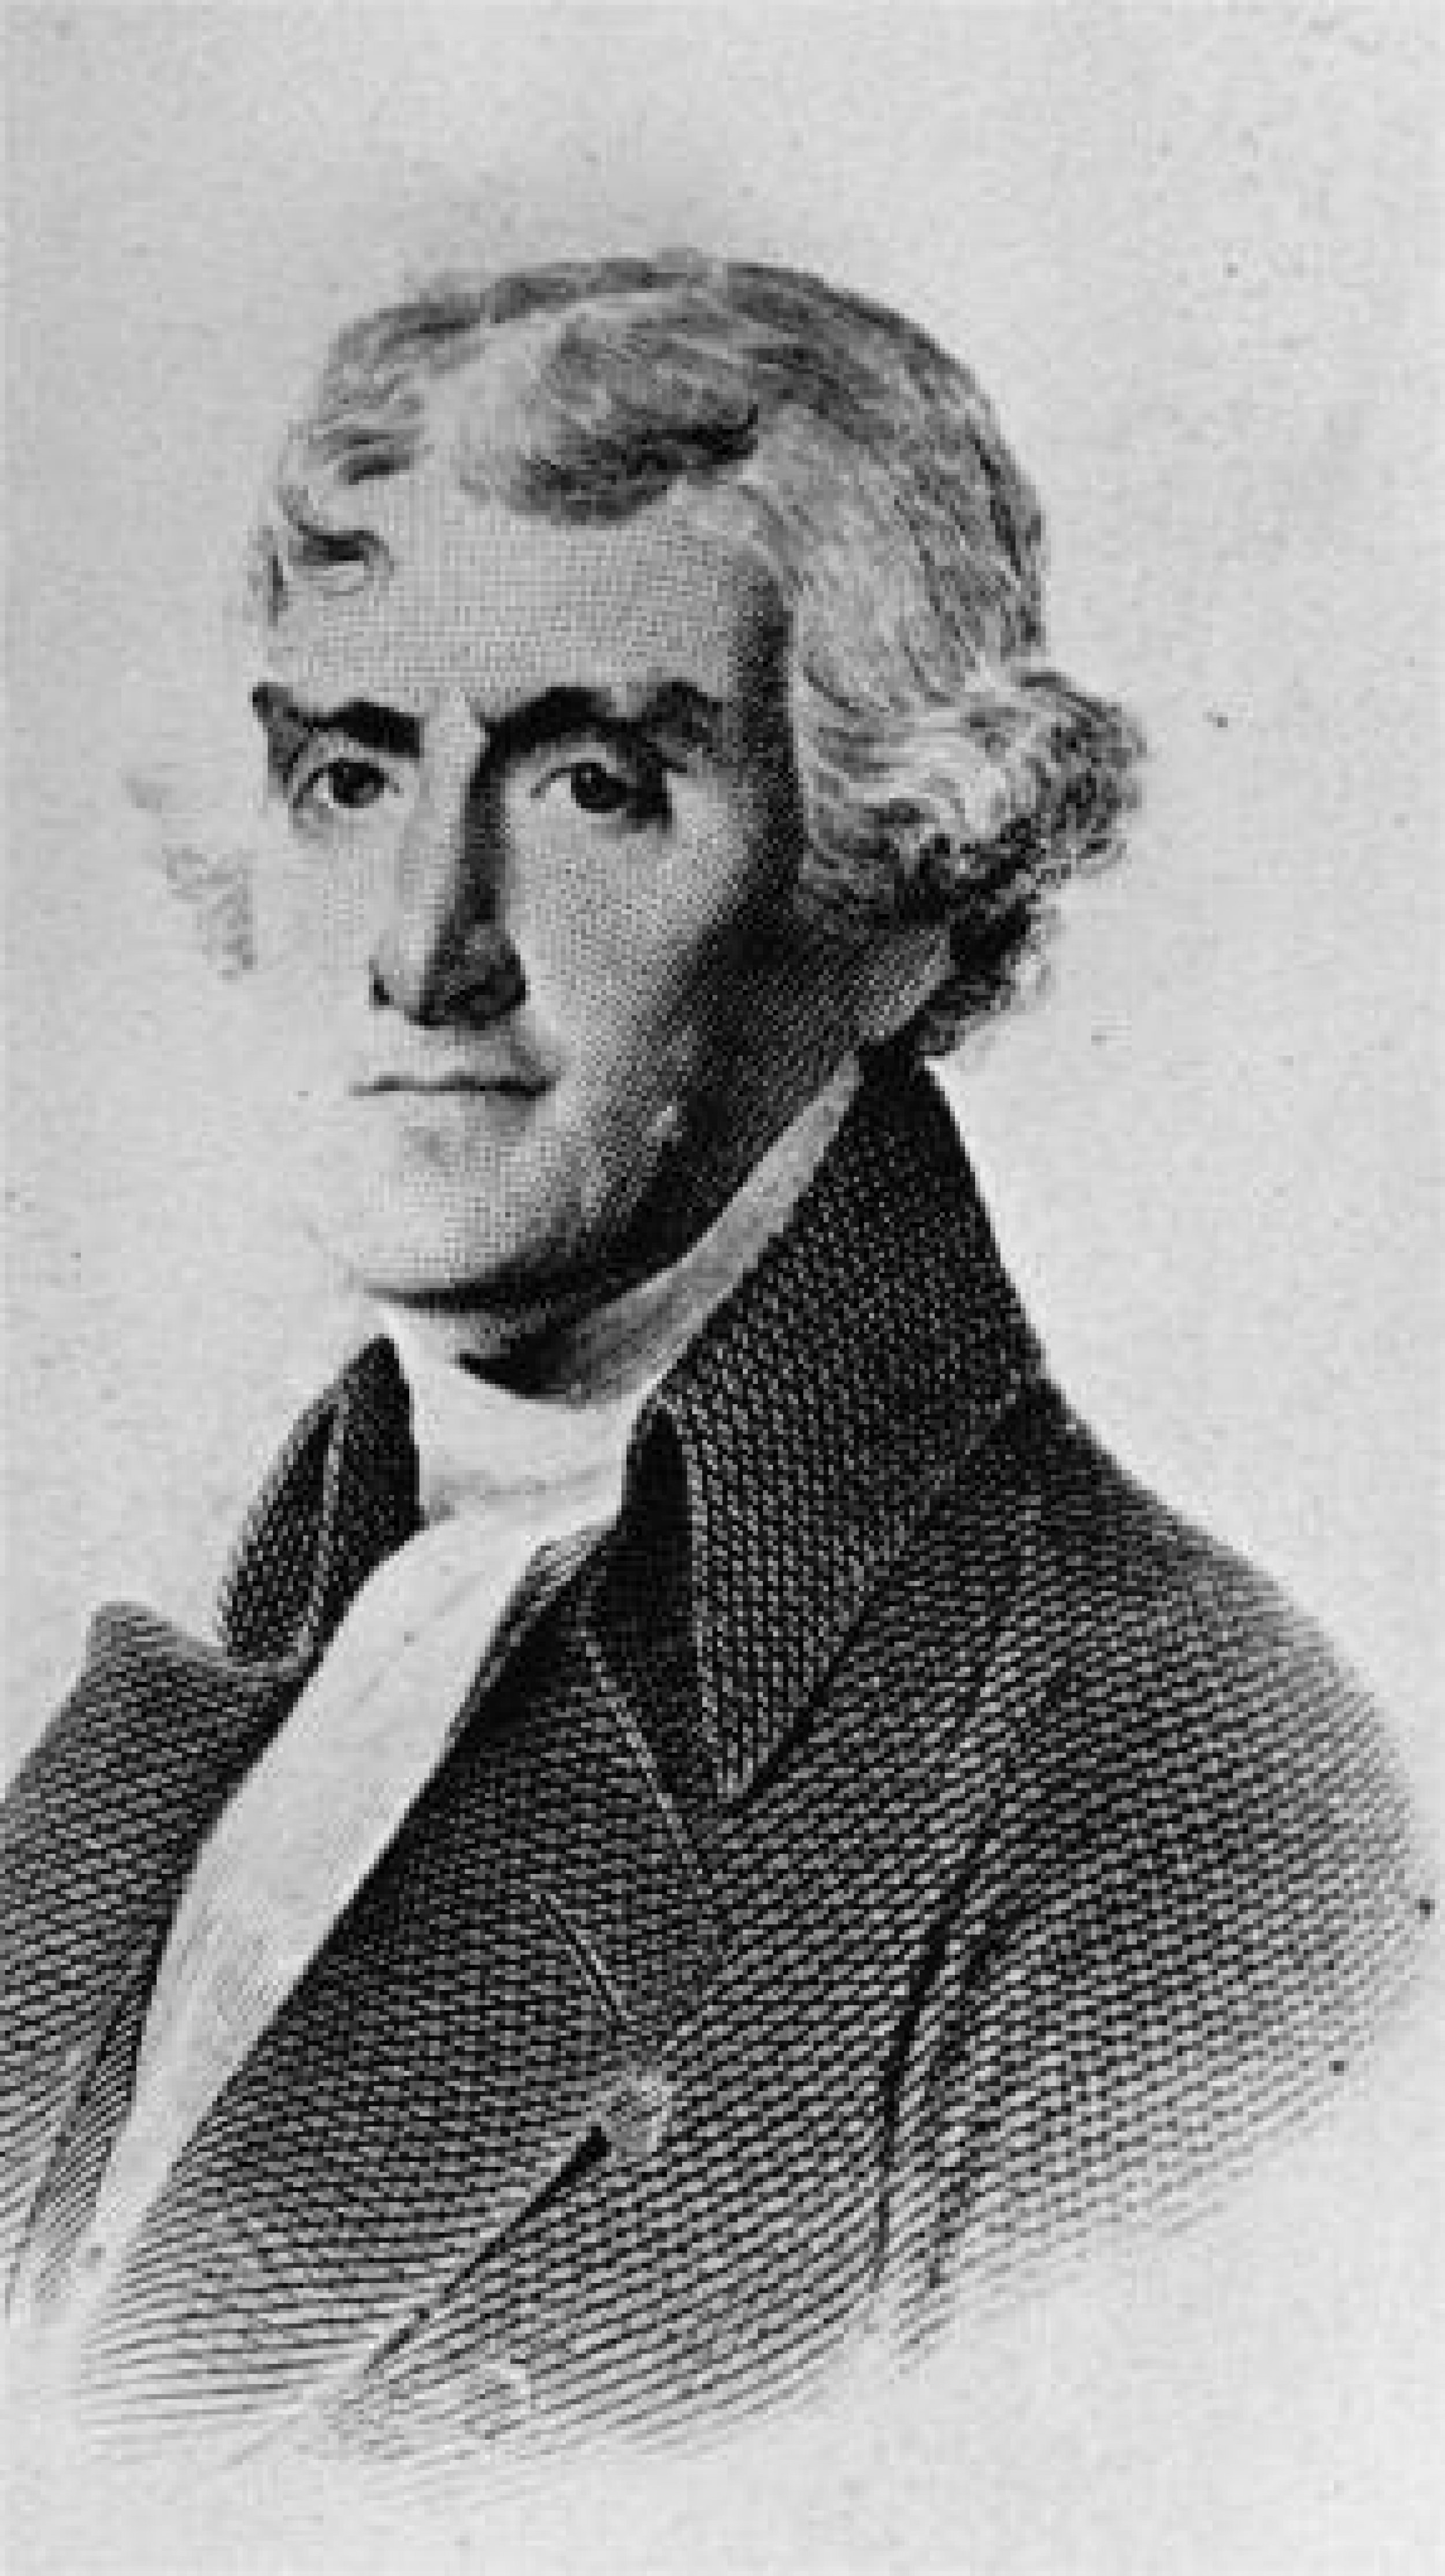 An undated portrait and engraving of Thomas Jefferson, the third president of the United States 1801-1809, author of the Declaration of Independence and apostle of agrarian democracy.